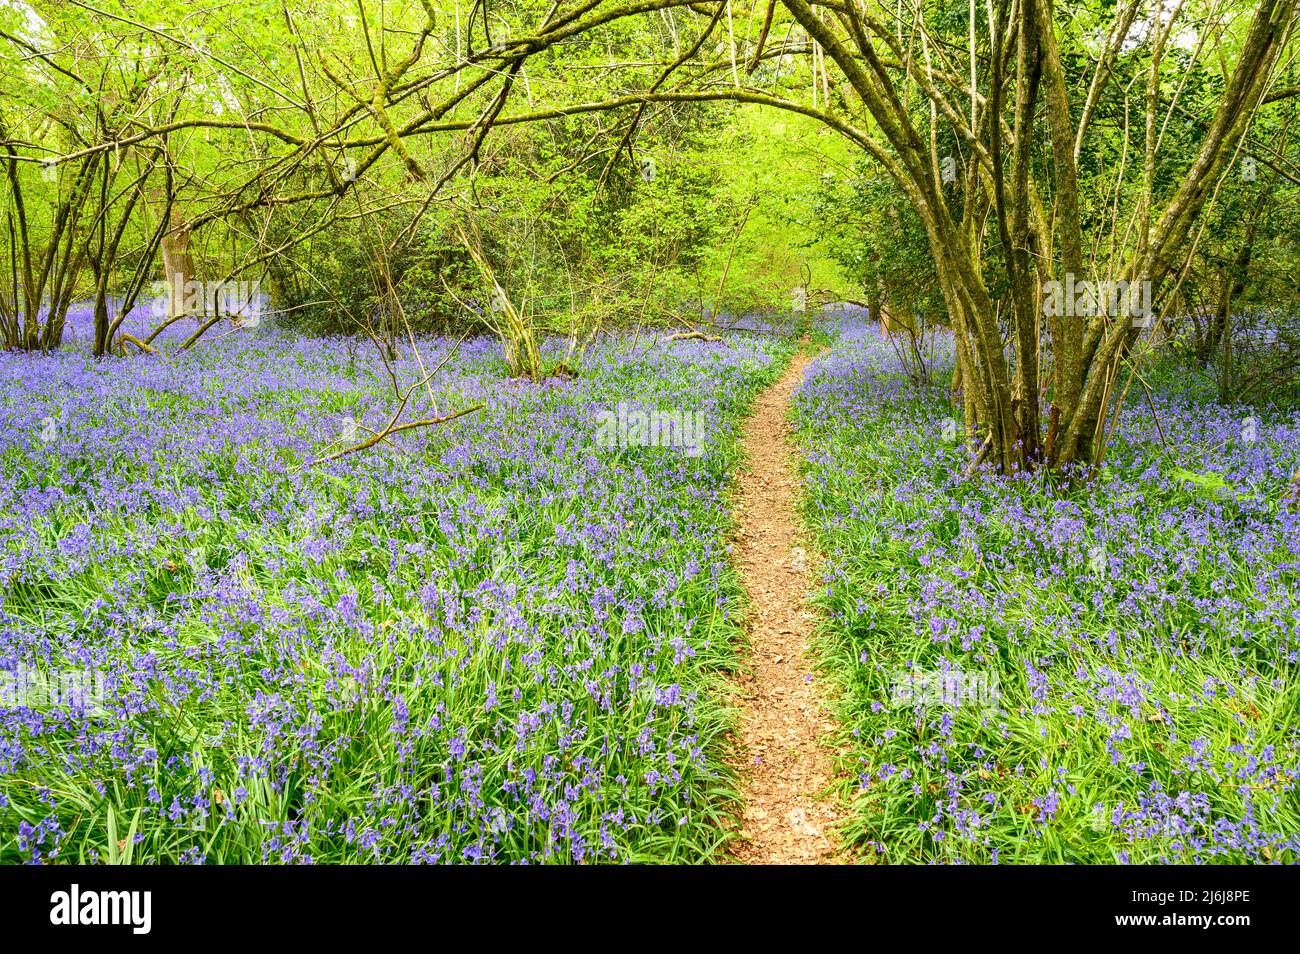 A public footpath leads through coppiced woodland with bluebells covering the ground on the outskirts of Billingshurst in West Sussex, England. Stock Photo